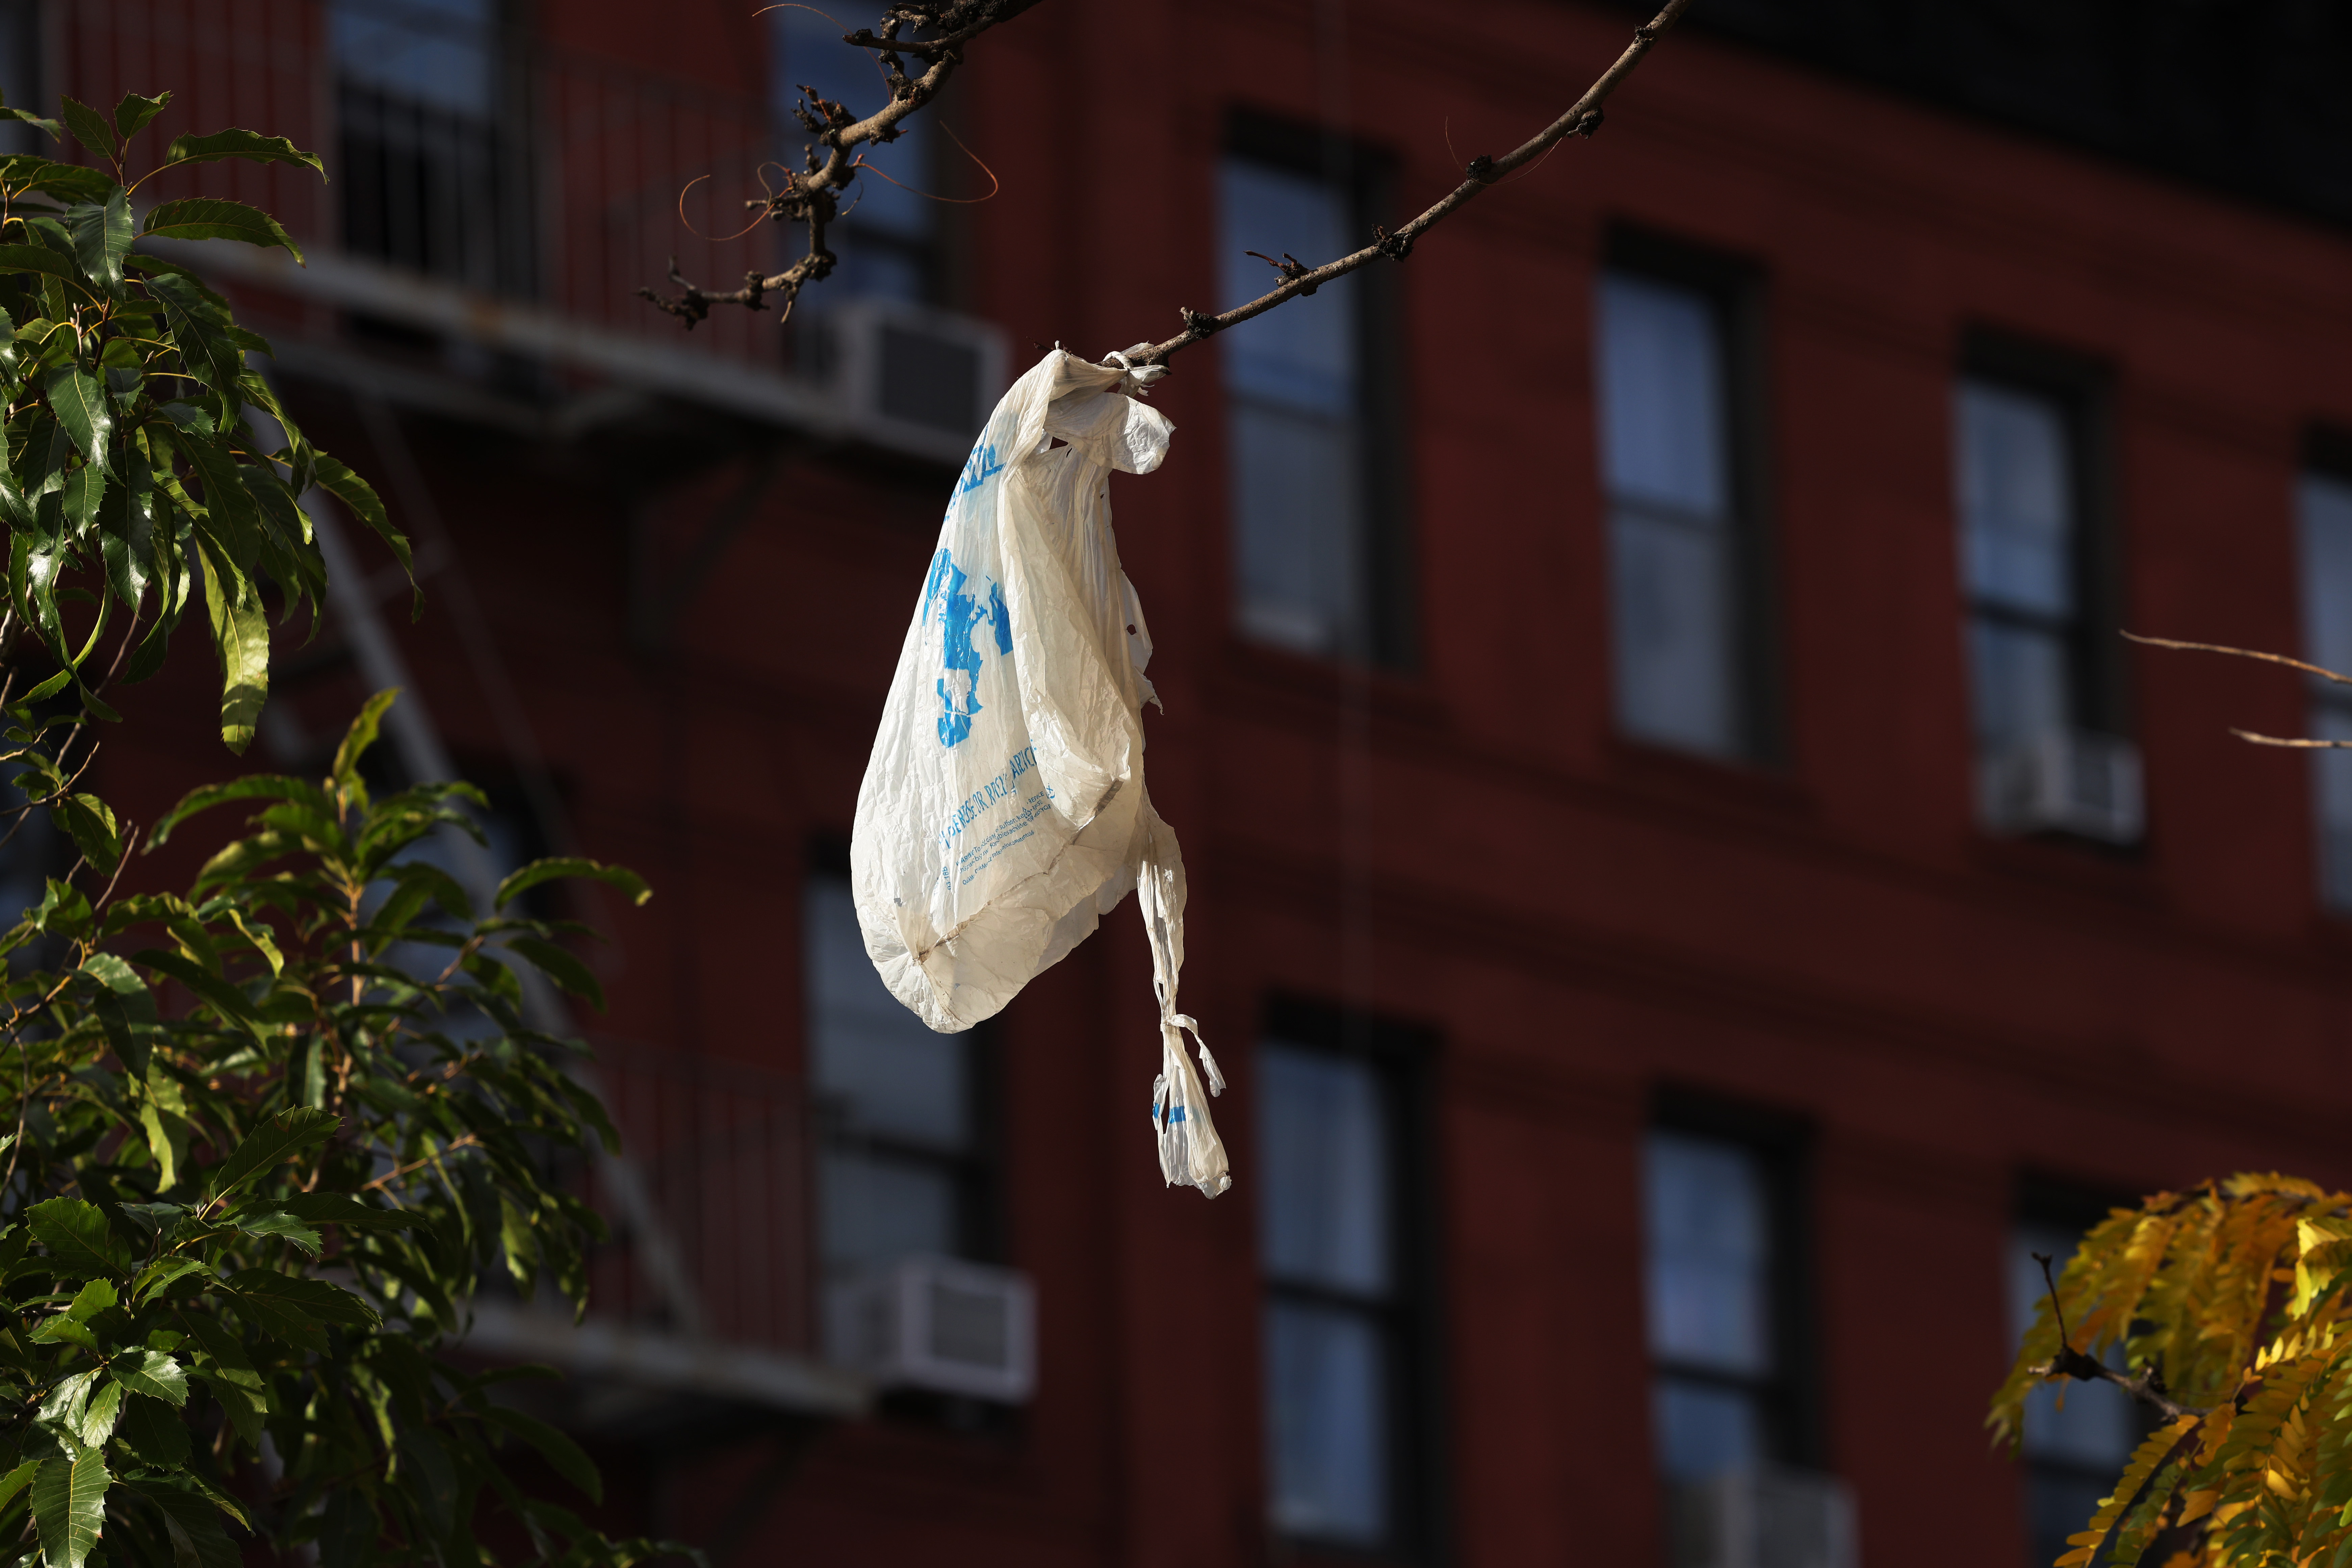 Baltimore Plastic Bag Ban Now In Effect: What You Should Know